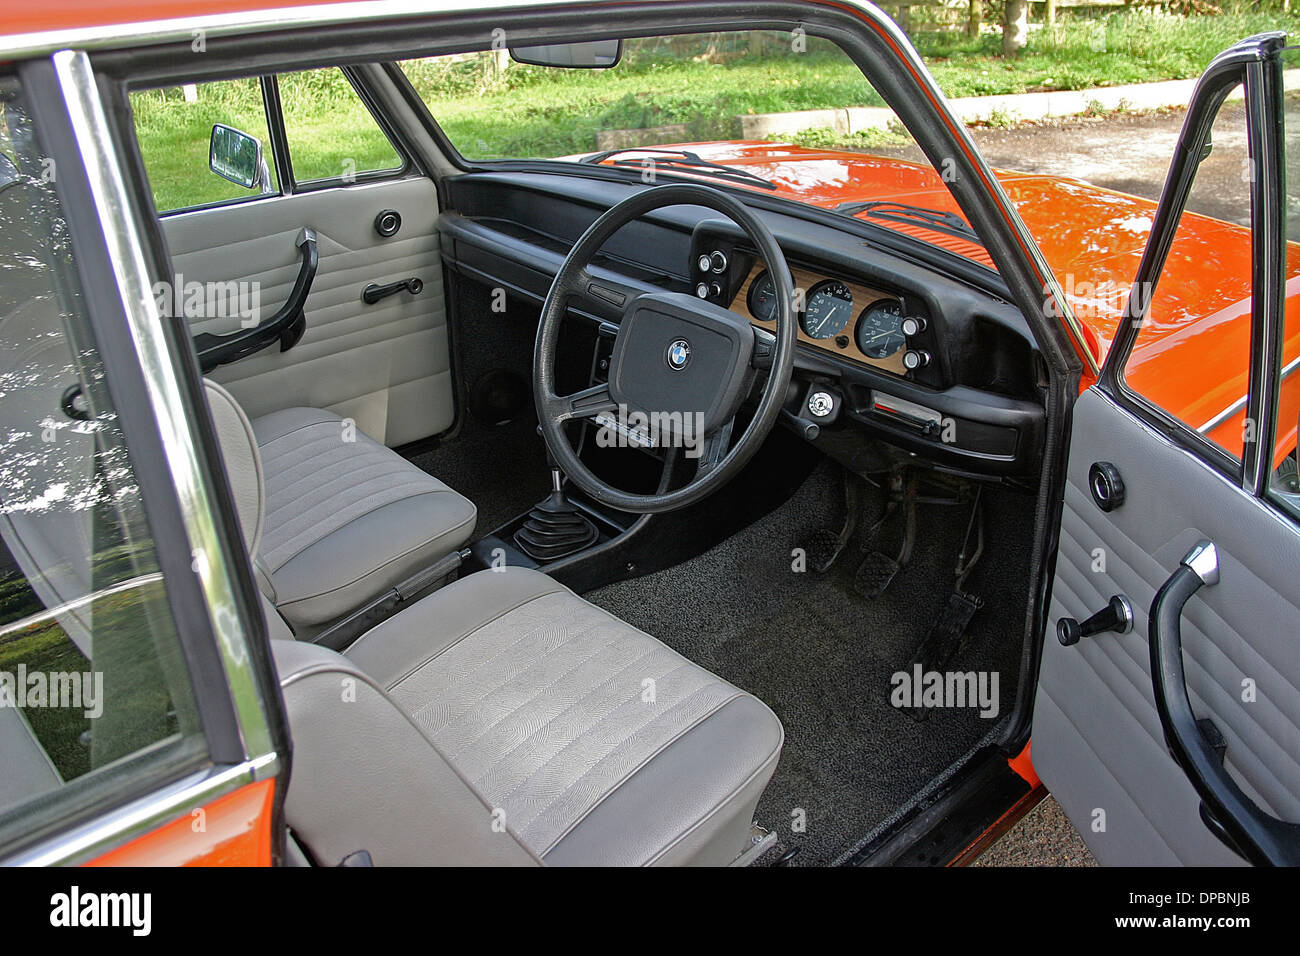 1974 BMW 2002tii, the traditional German “ultimate driving machine”, interior view Stock Photo